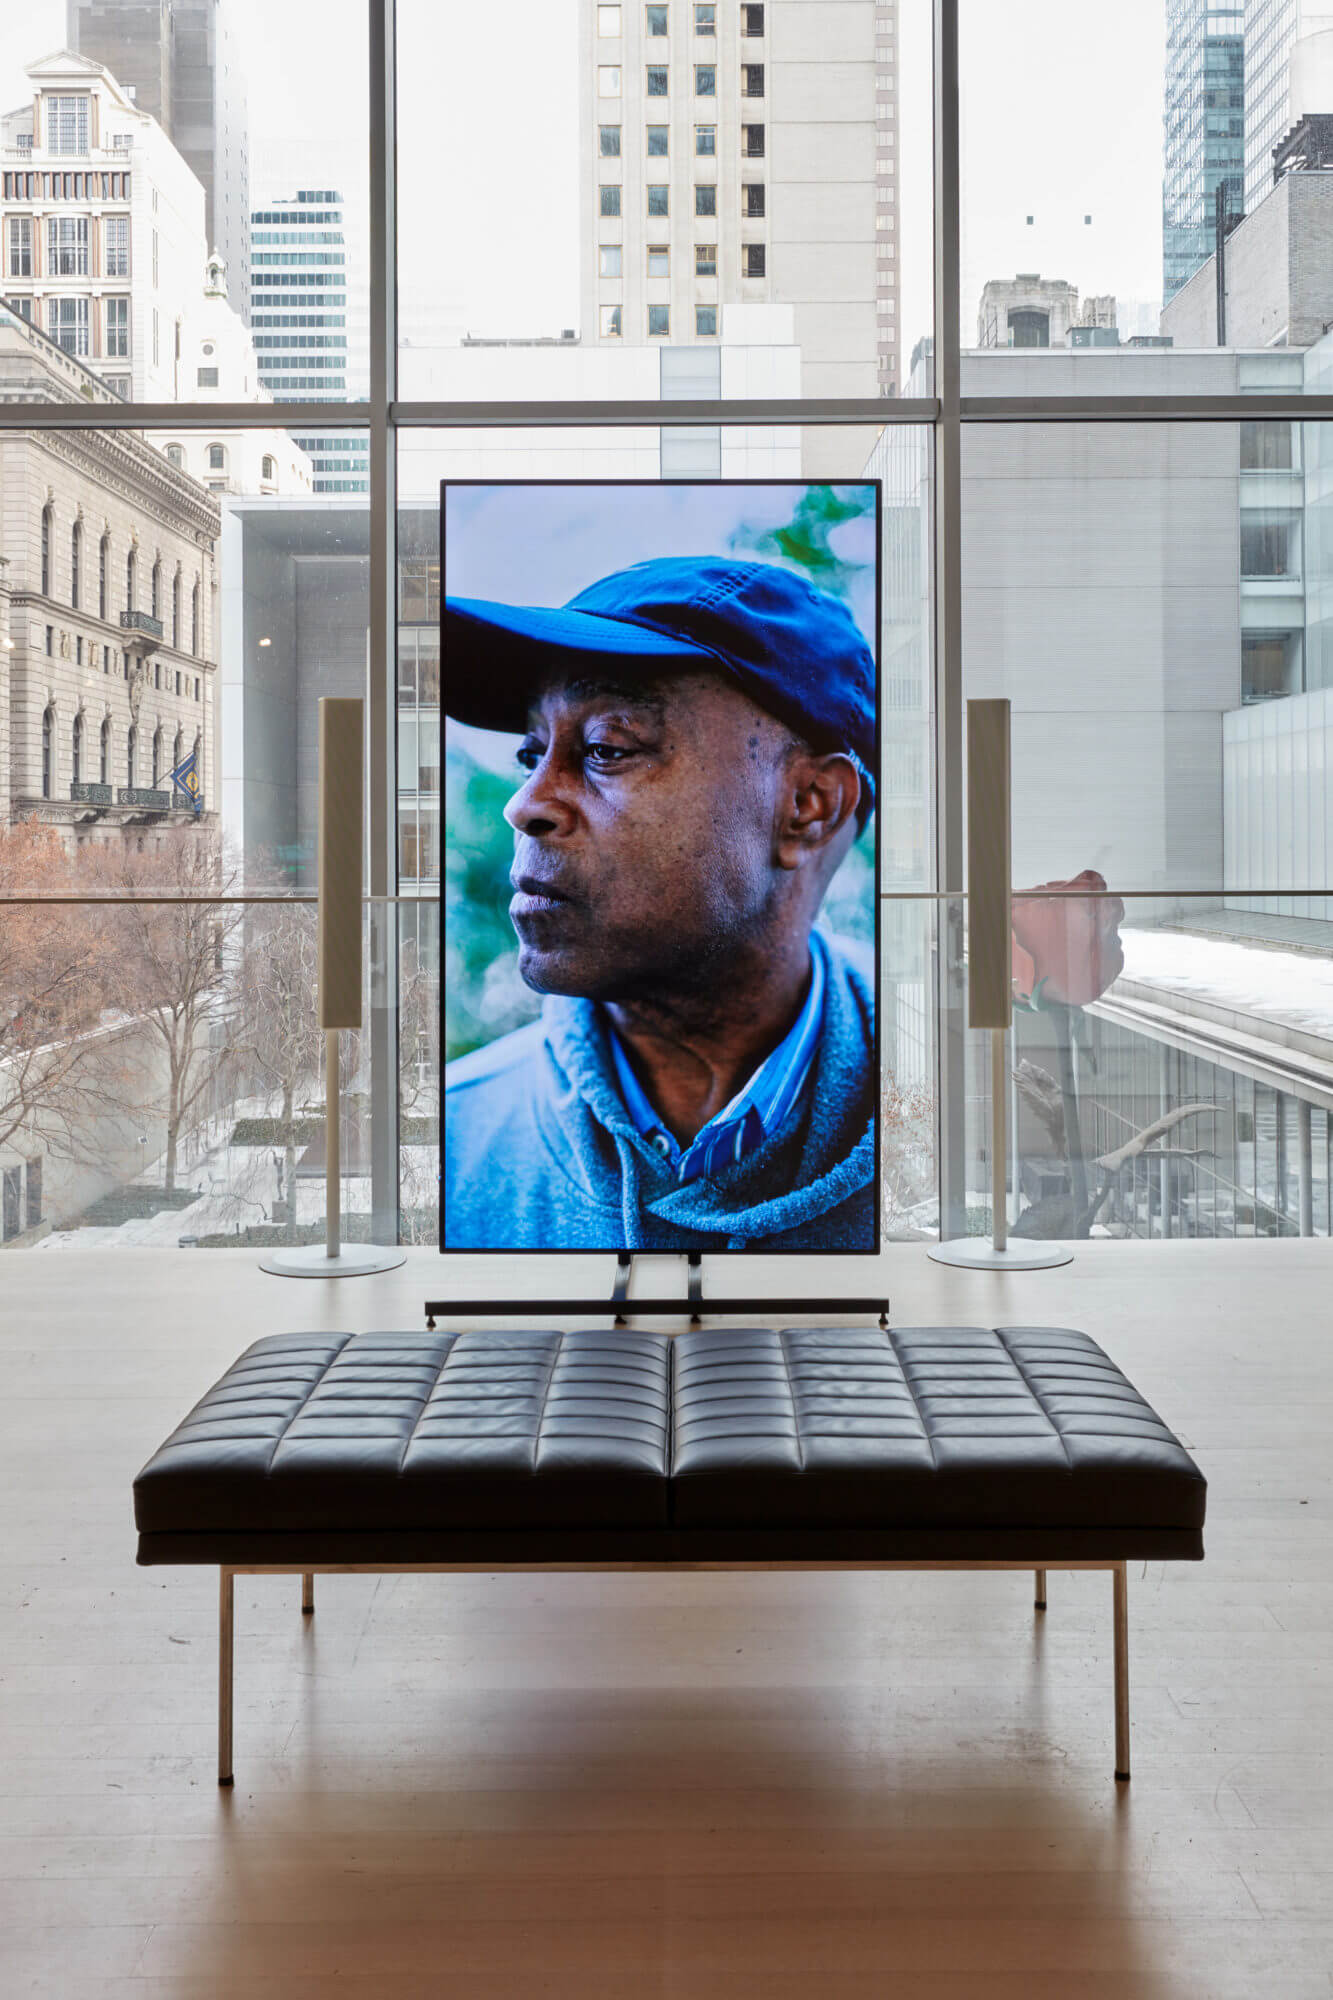 photograph depicting a vertically oriented video screen set within a museum gallery with a cityscape in the background